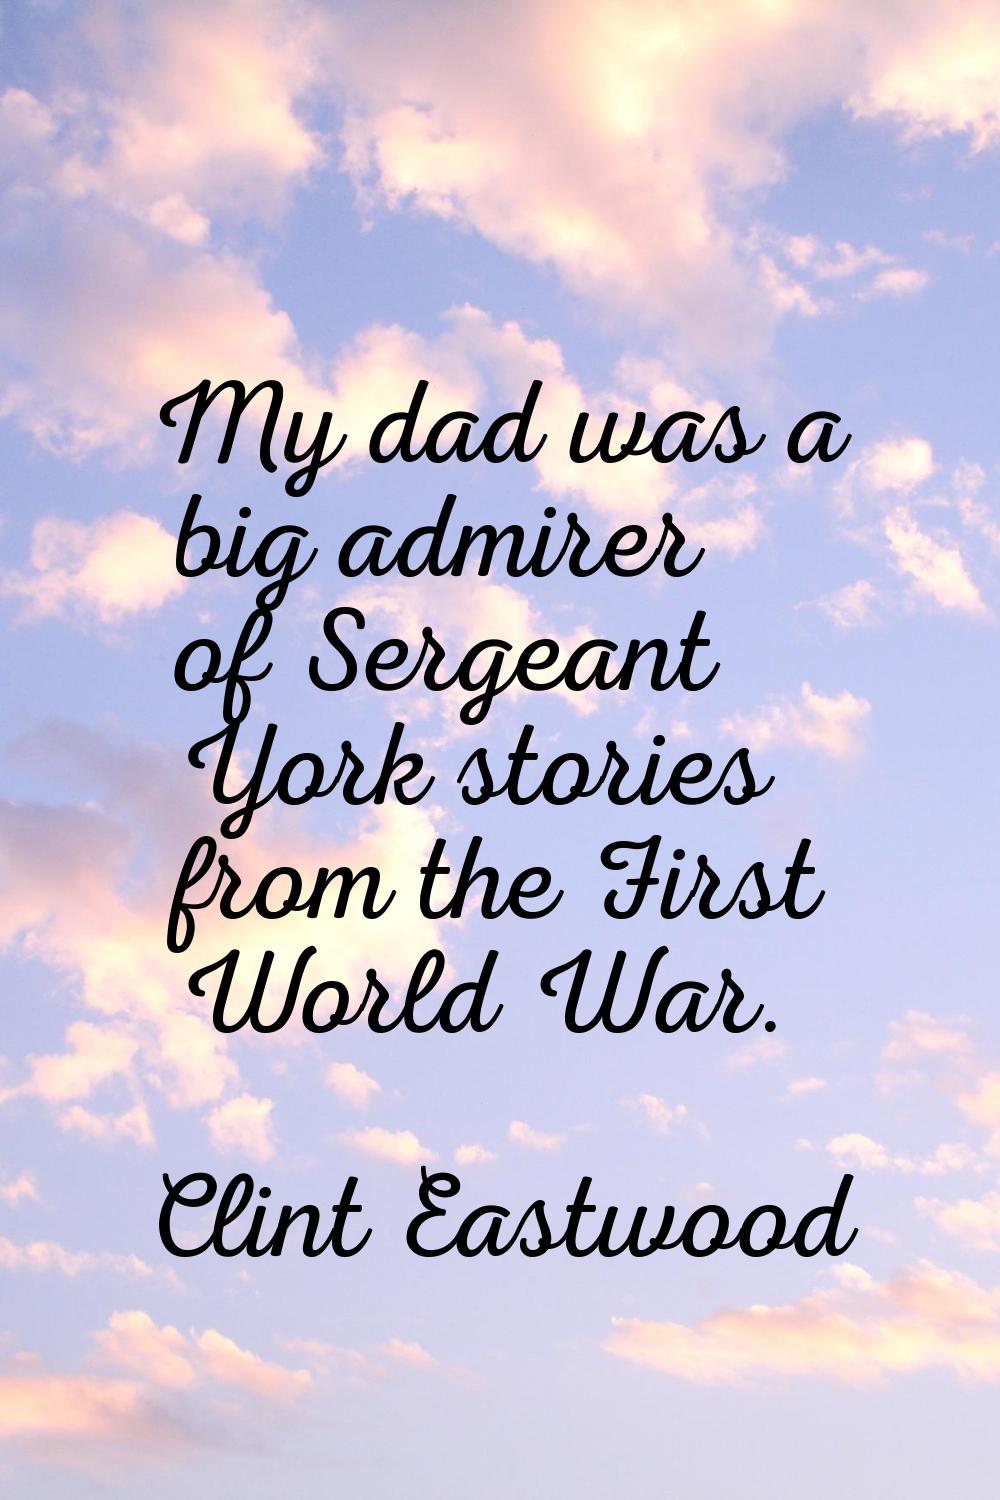 My dad was a big admirer of Sergeant York stories from the First World War.